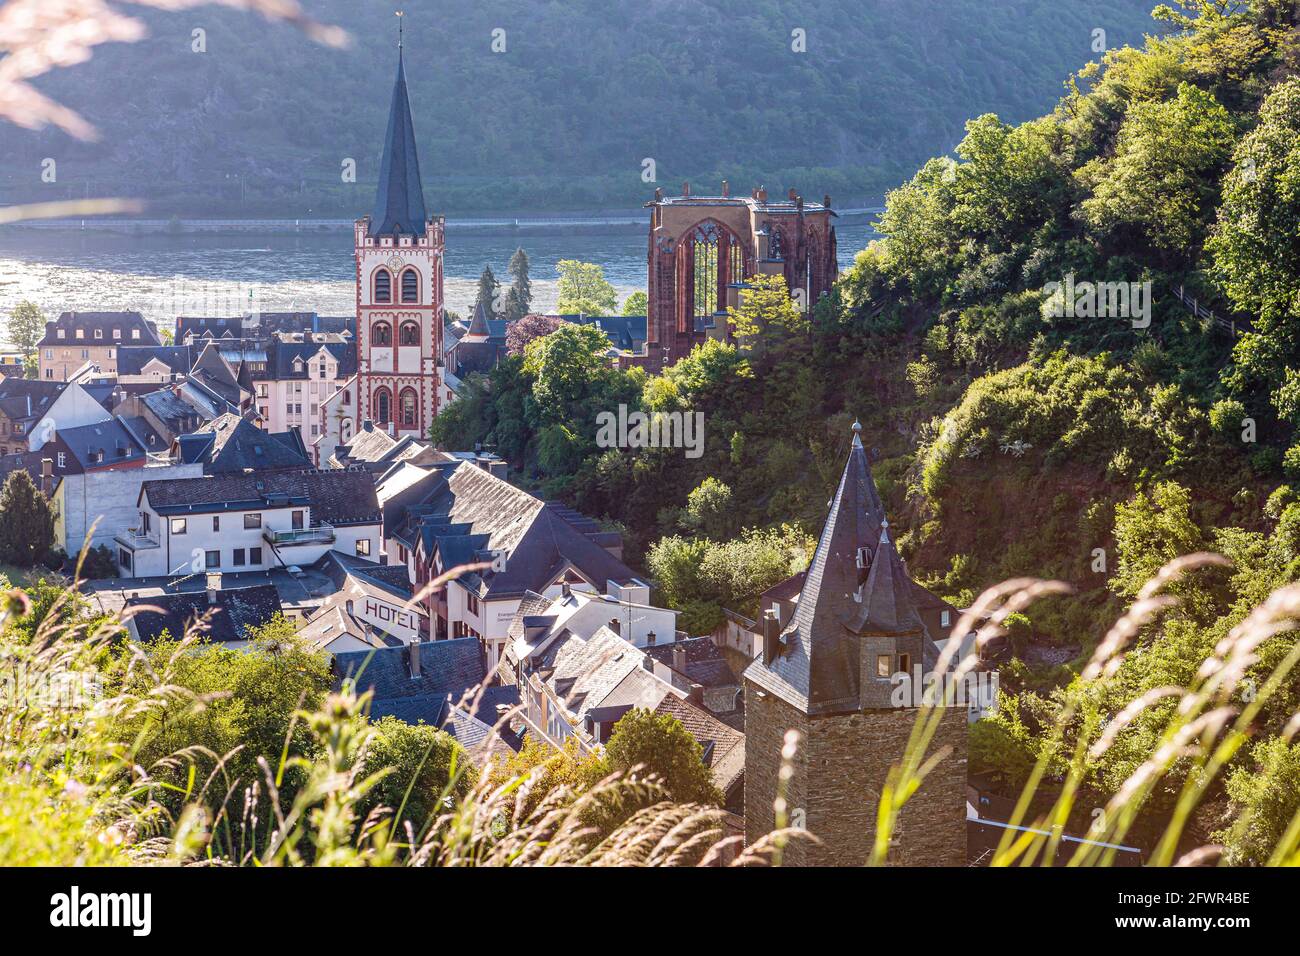 Werner chapel ruin and St. Peter church against backlight, Bacharach, rhine valley, Germany, Europe Stock Photo